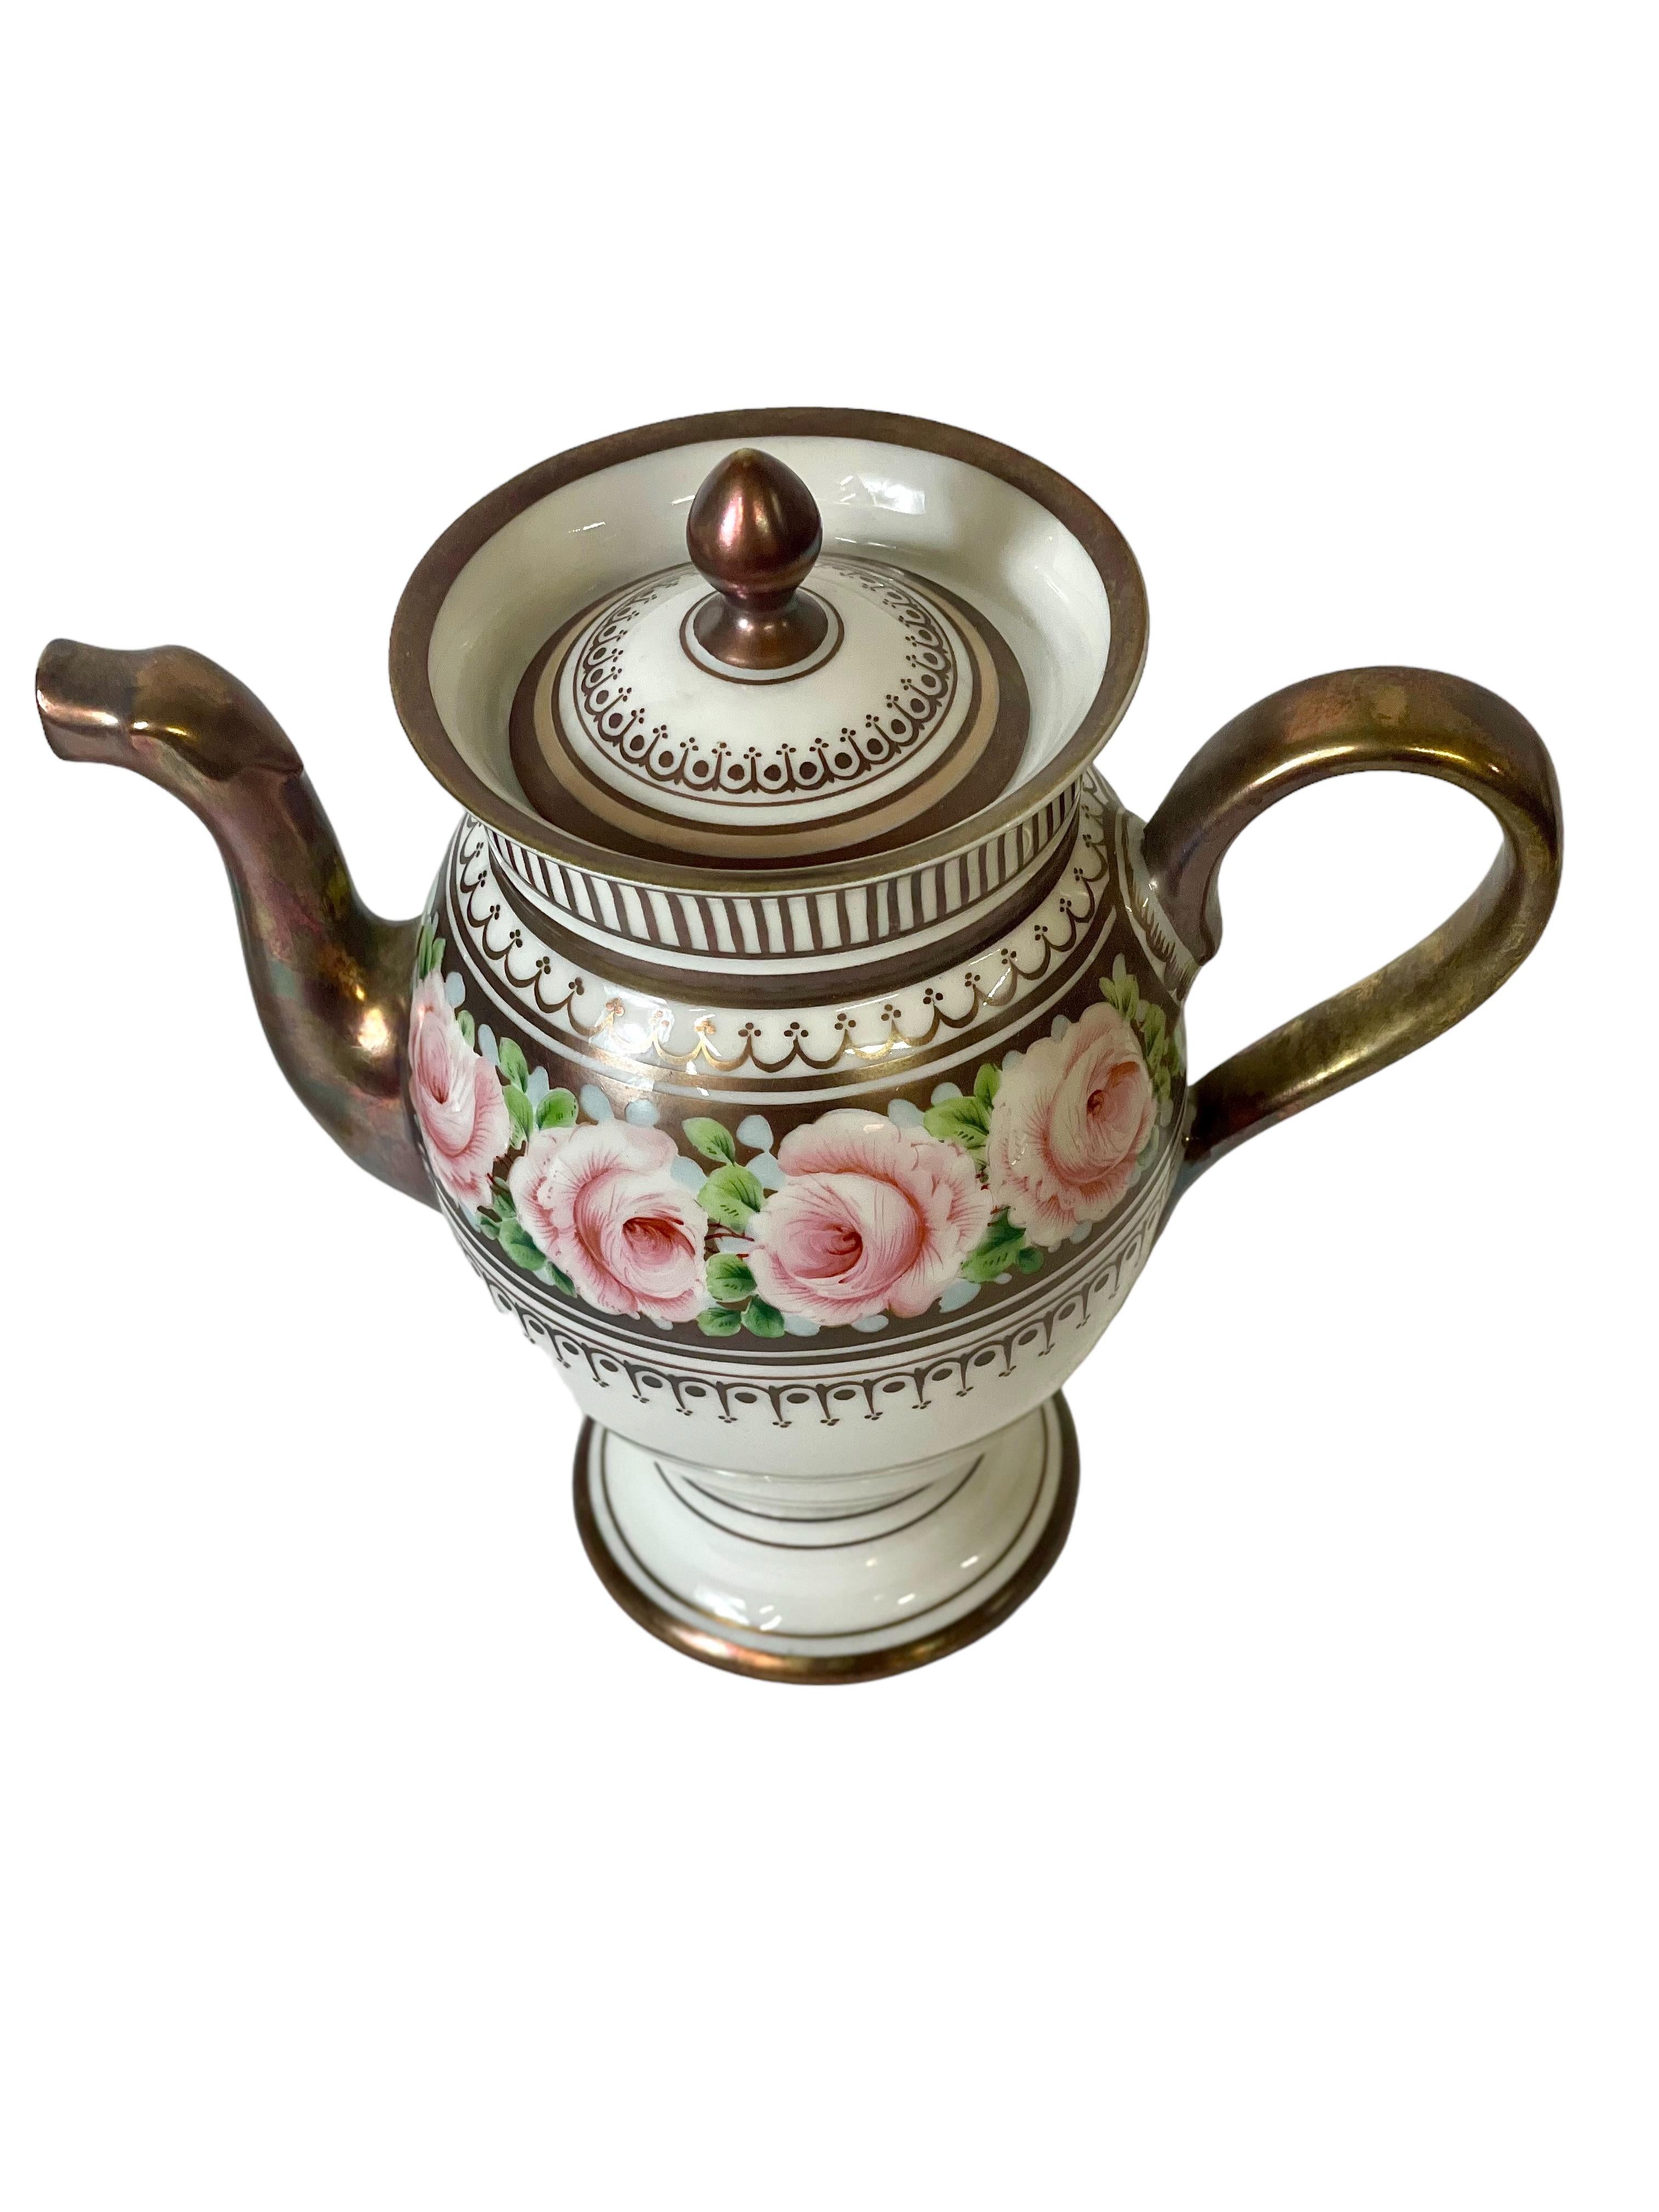 French Vintage Empire Style Porcelain Coffee Service with a decor of Flowers For Sale 2